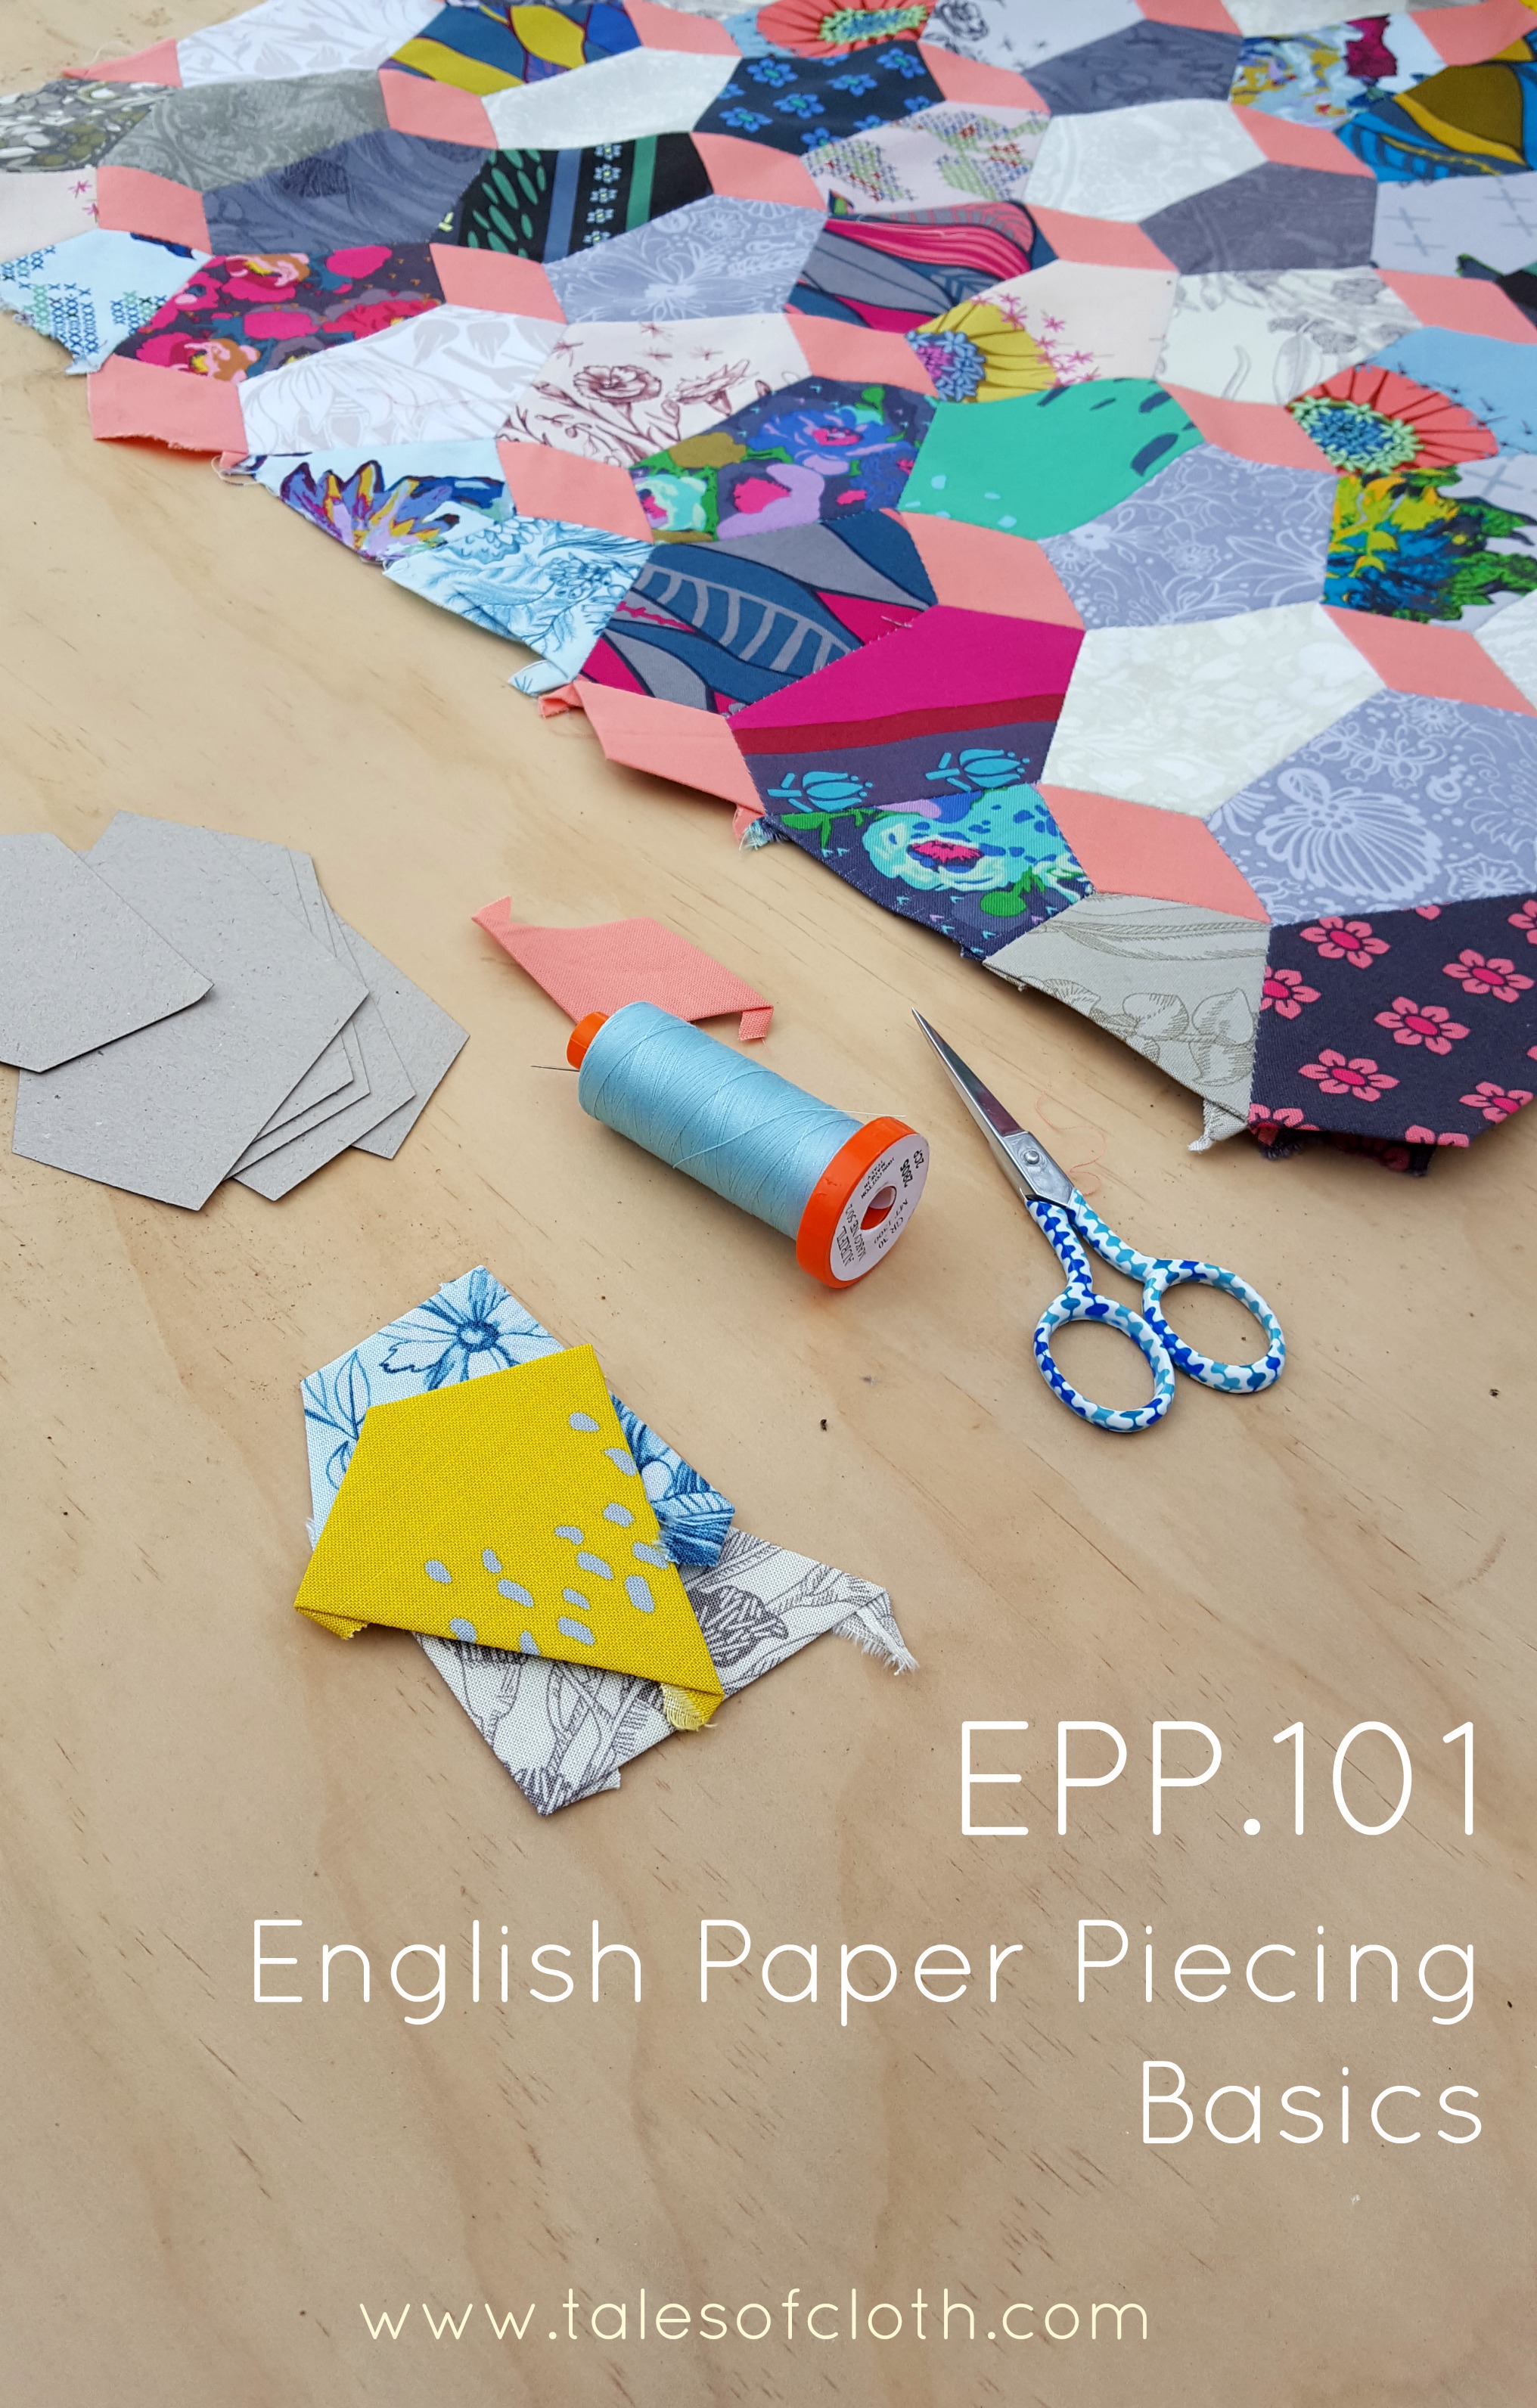 How to Sew Whipstitch for English Paper Piecing – Tales of Cloth